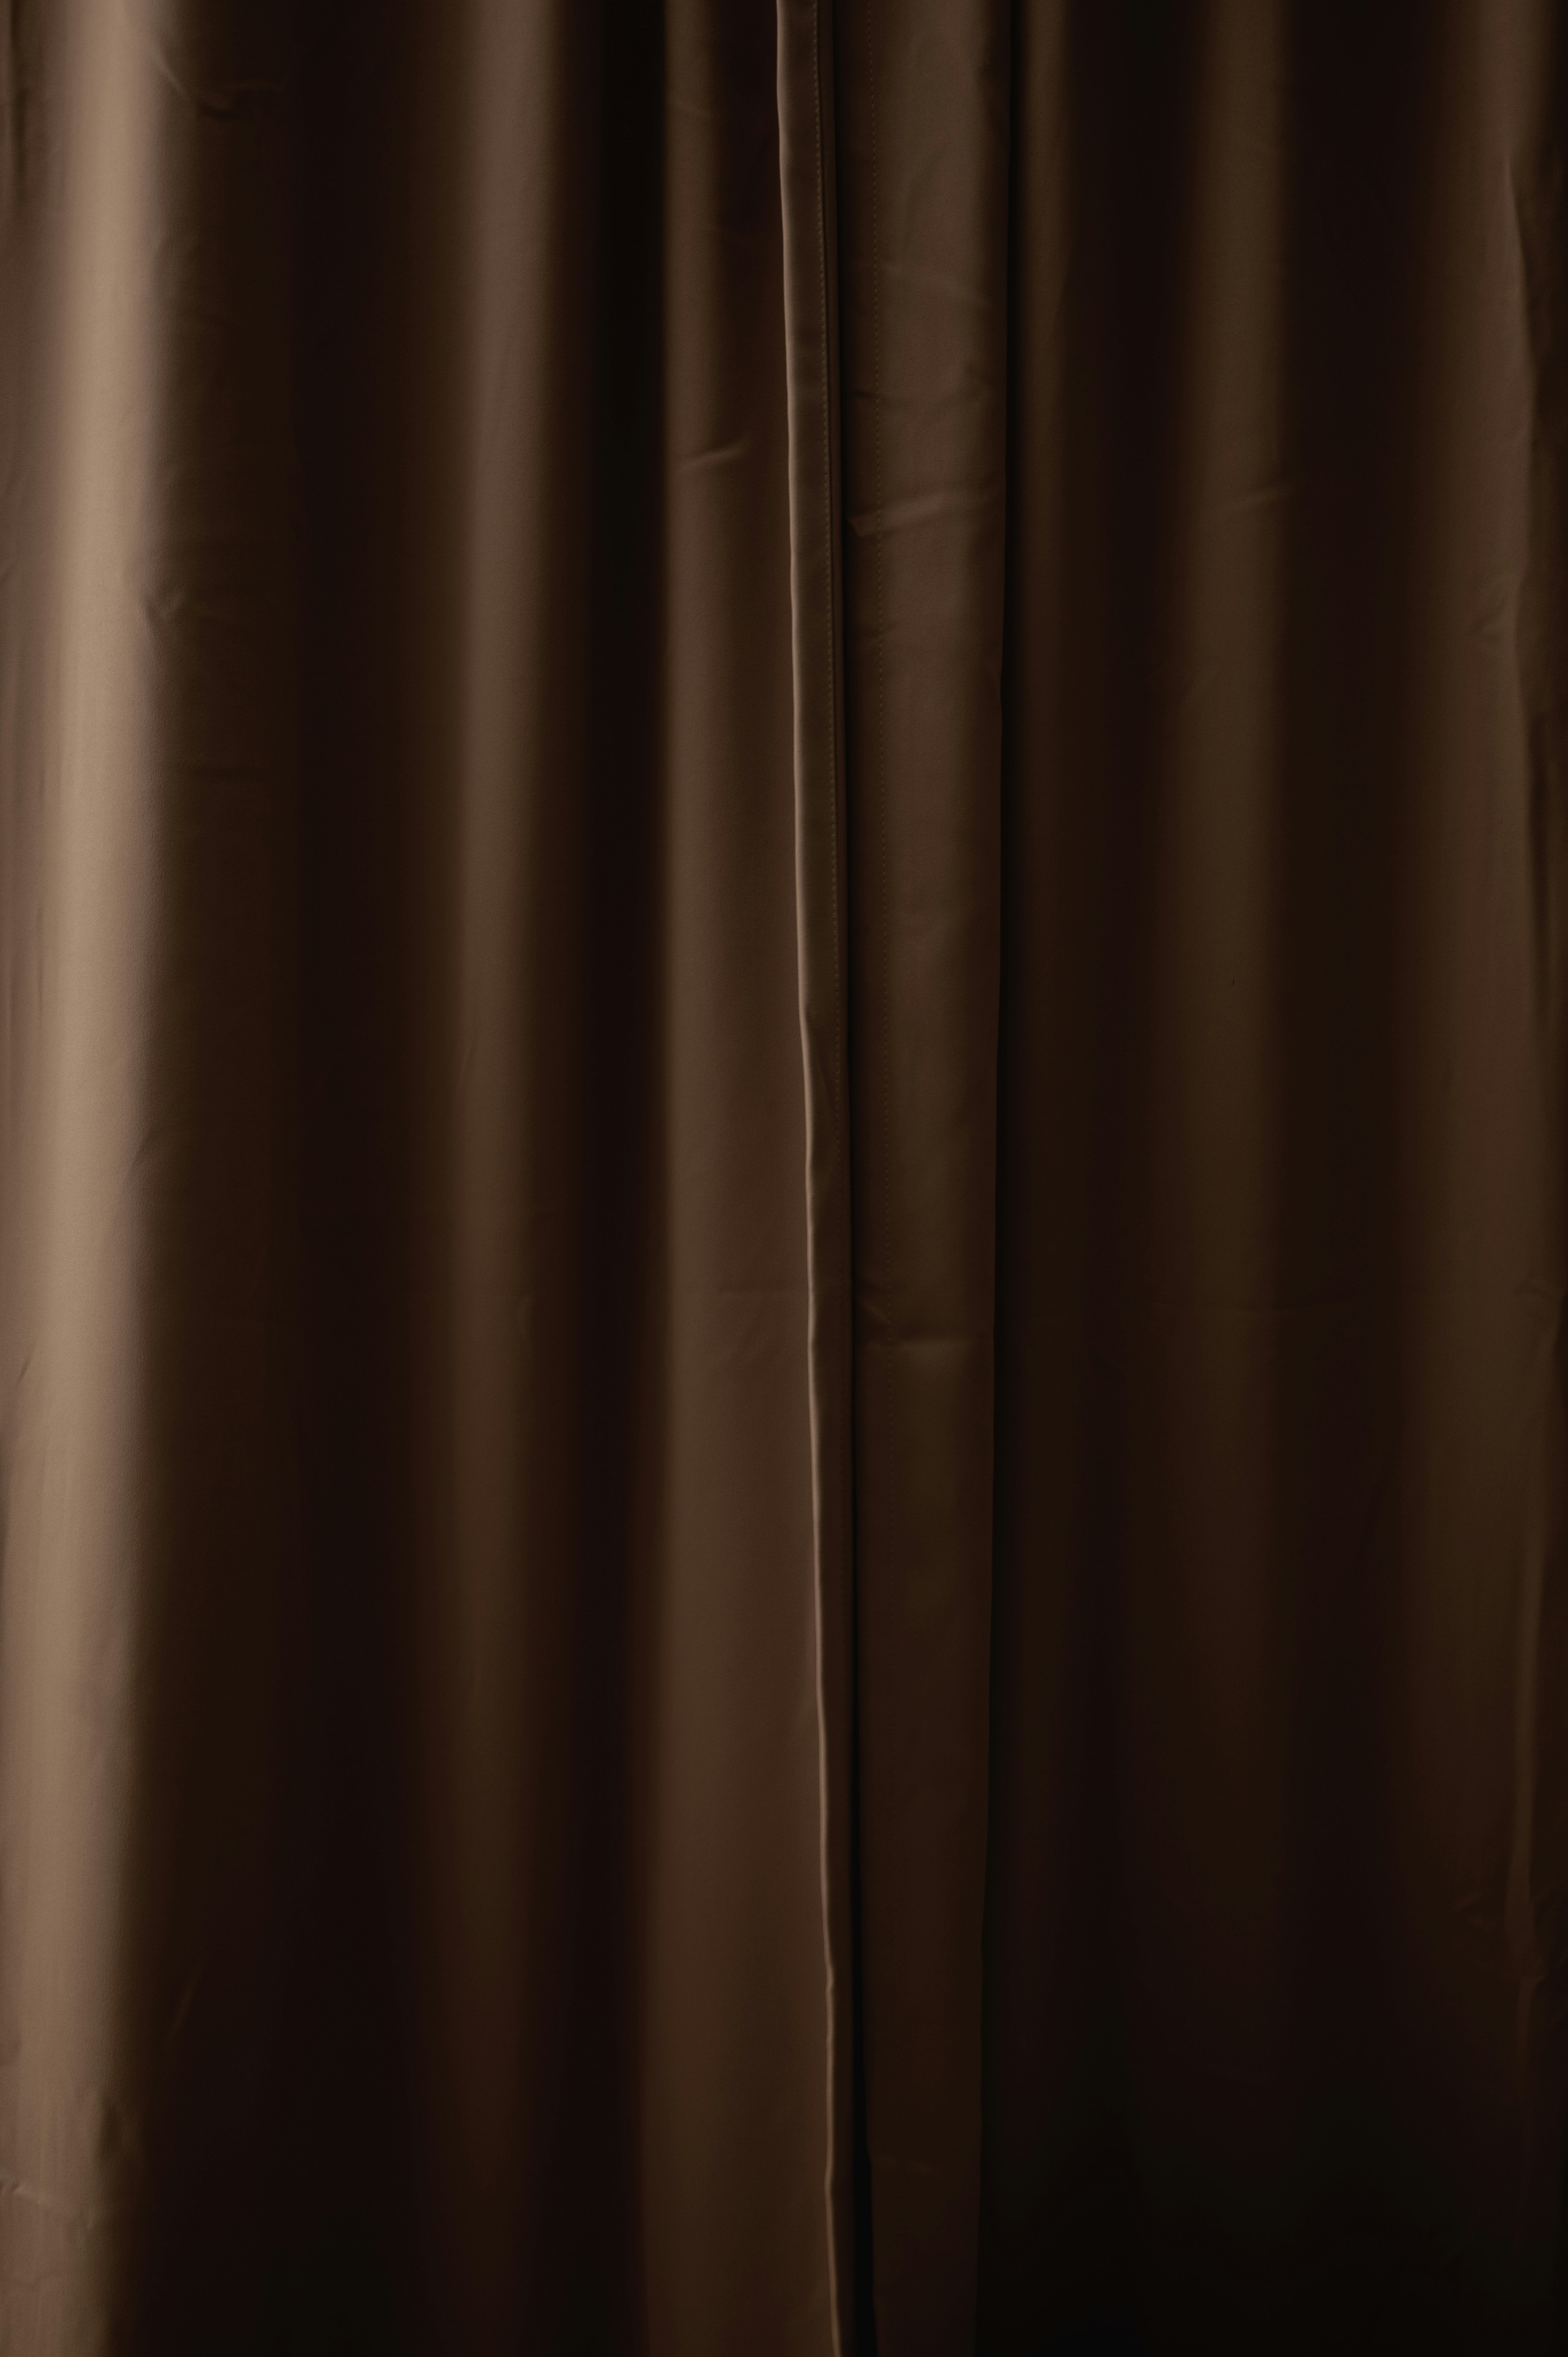 gray curtain in close up image